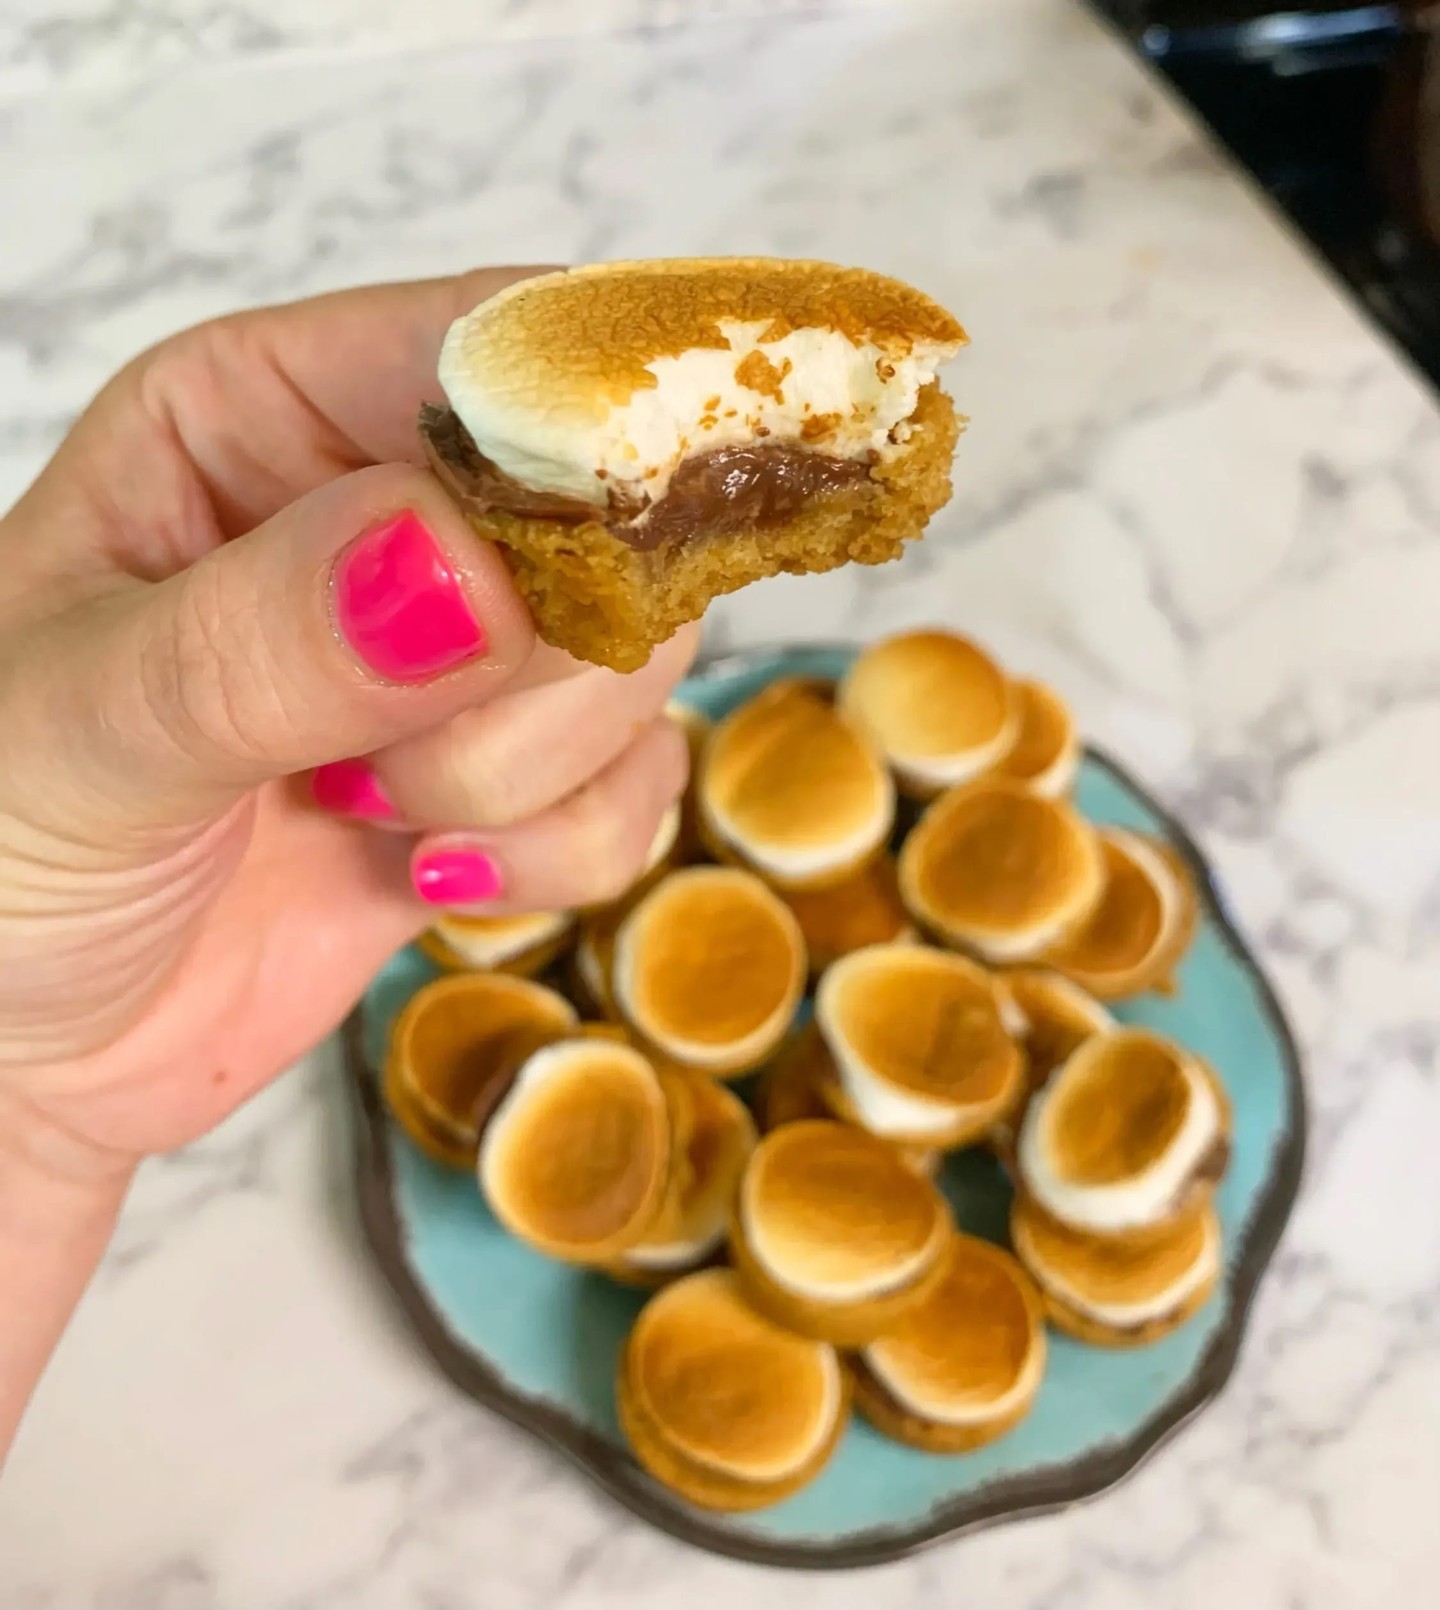 Ok so apparently we have an obsession with s'mores around here . . . I'm sure you've seen our popular S'mores Bars to feed a crowd (if you haven't, look at our IGTV videos for the recipe video).⁣
These are the cutest little 𝐌𝐢𝐧𝐢 𝐒'𝐦𝐨𝐫𝐞𝐬 𝐏𝐢𝐞𝐬 :-)⁣
A graham cracker crust filled with chocolate and marshmallow-y goodness. Plus, they stay together great when taken out of the muffin tin so they're easy to serve at a party as a finger food.⁣
FInd this delicious recipe at 𝗦𝗶𝘅𝗖𝗹𝗲𝘃𝗲𝗿𝗦𝗶𝘀𝘁𝗲𝗿𝘀.𝗰𝗼𝗺⁣
⁣
#sixcleversisters #smores #food #partyfood #easyrecipe #rotd #recipe #sweets #dessert #marshmallow #hersheys #recipes #nationalsmoresday #chocolate #baking #instabake #bake #homemade #homebaked #homebaking